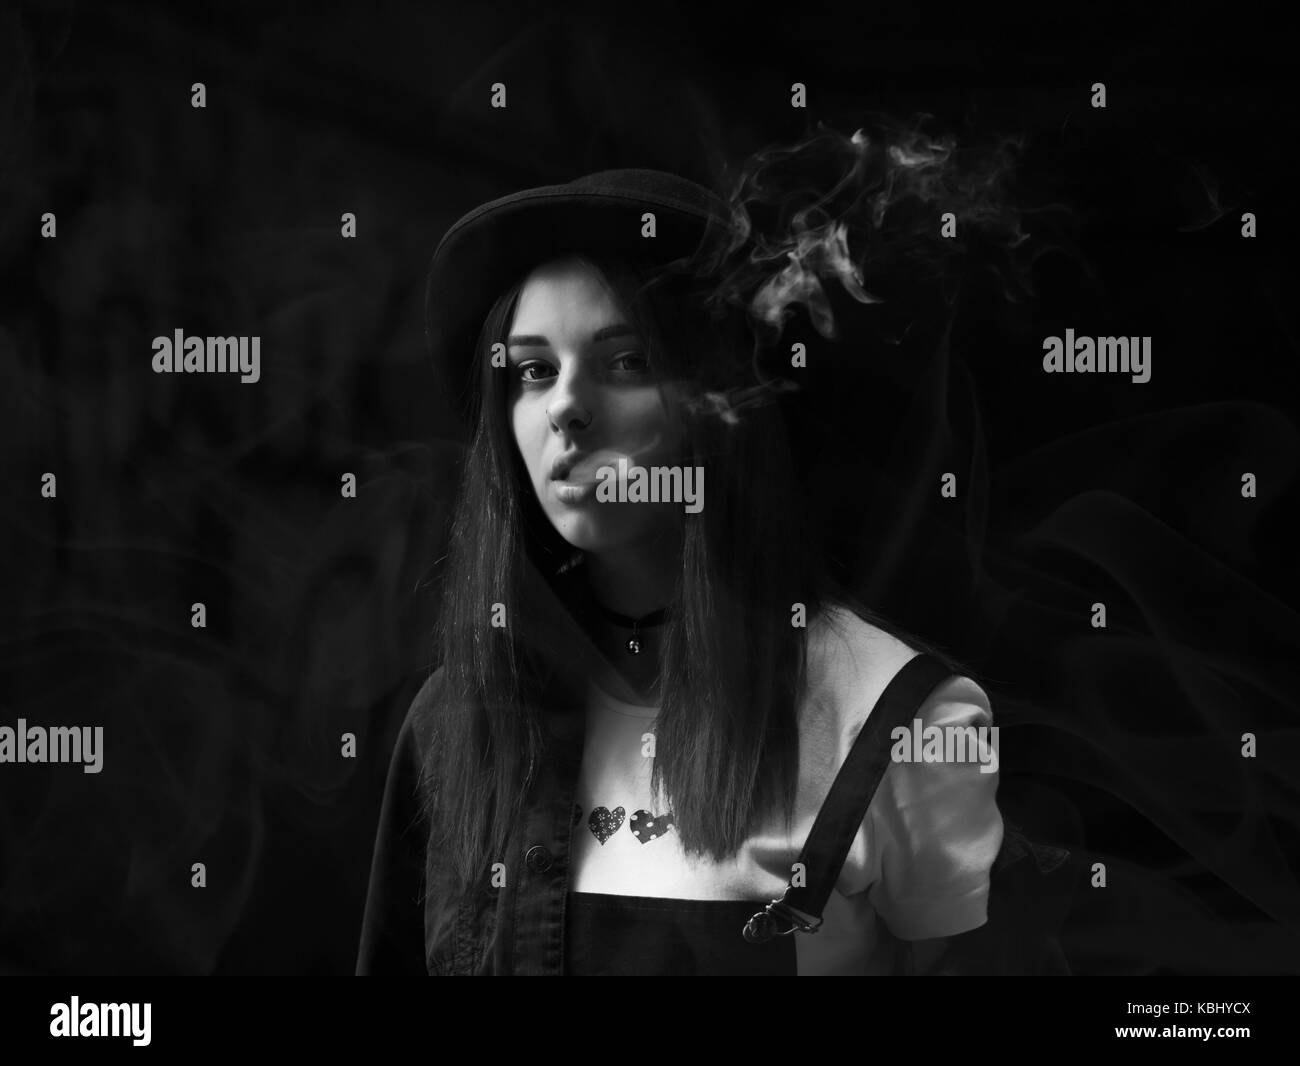 Emo girl smoking cigarette. Young student or pupil with blue colorful dyed  hair, hat, piercing,lenses,ears tunnels and unusual hairstyle stands on  black background. Photos